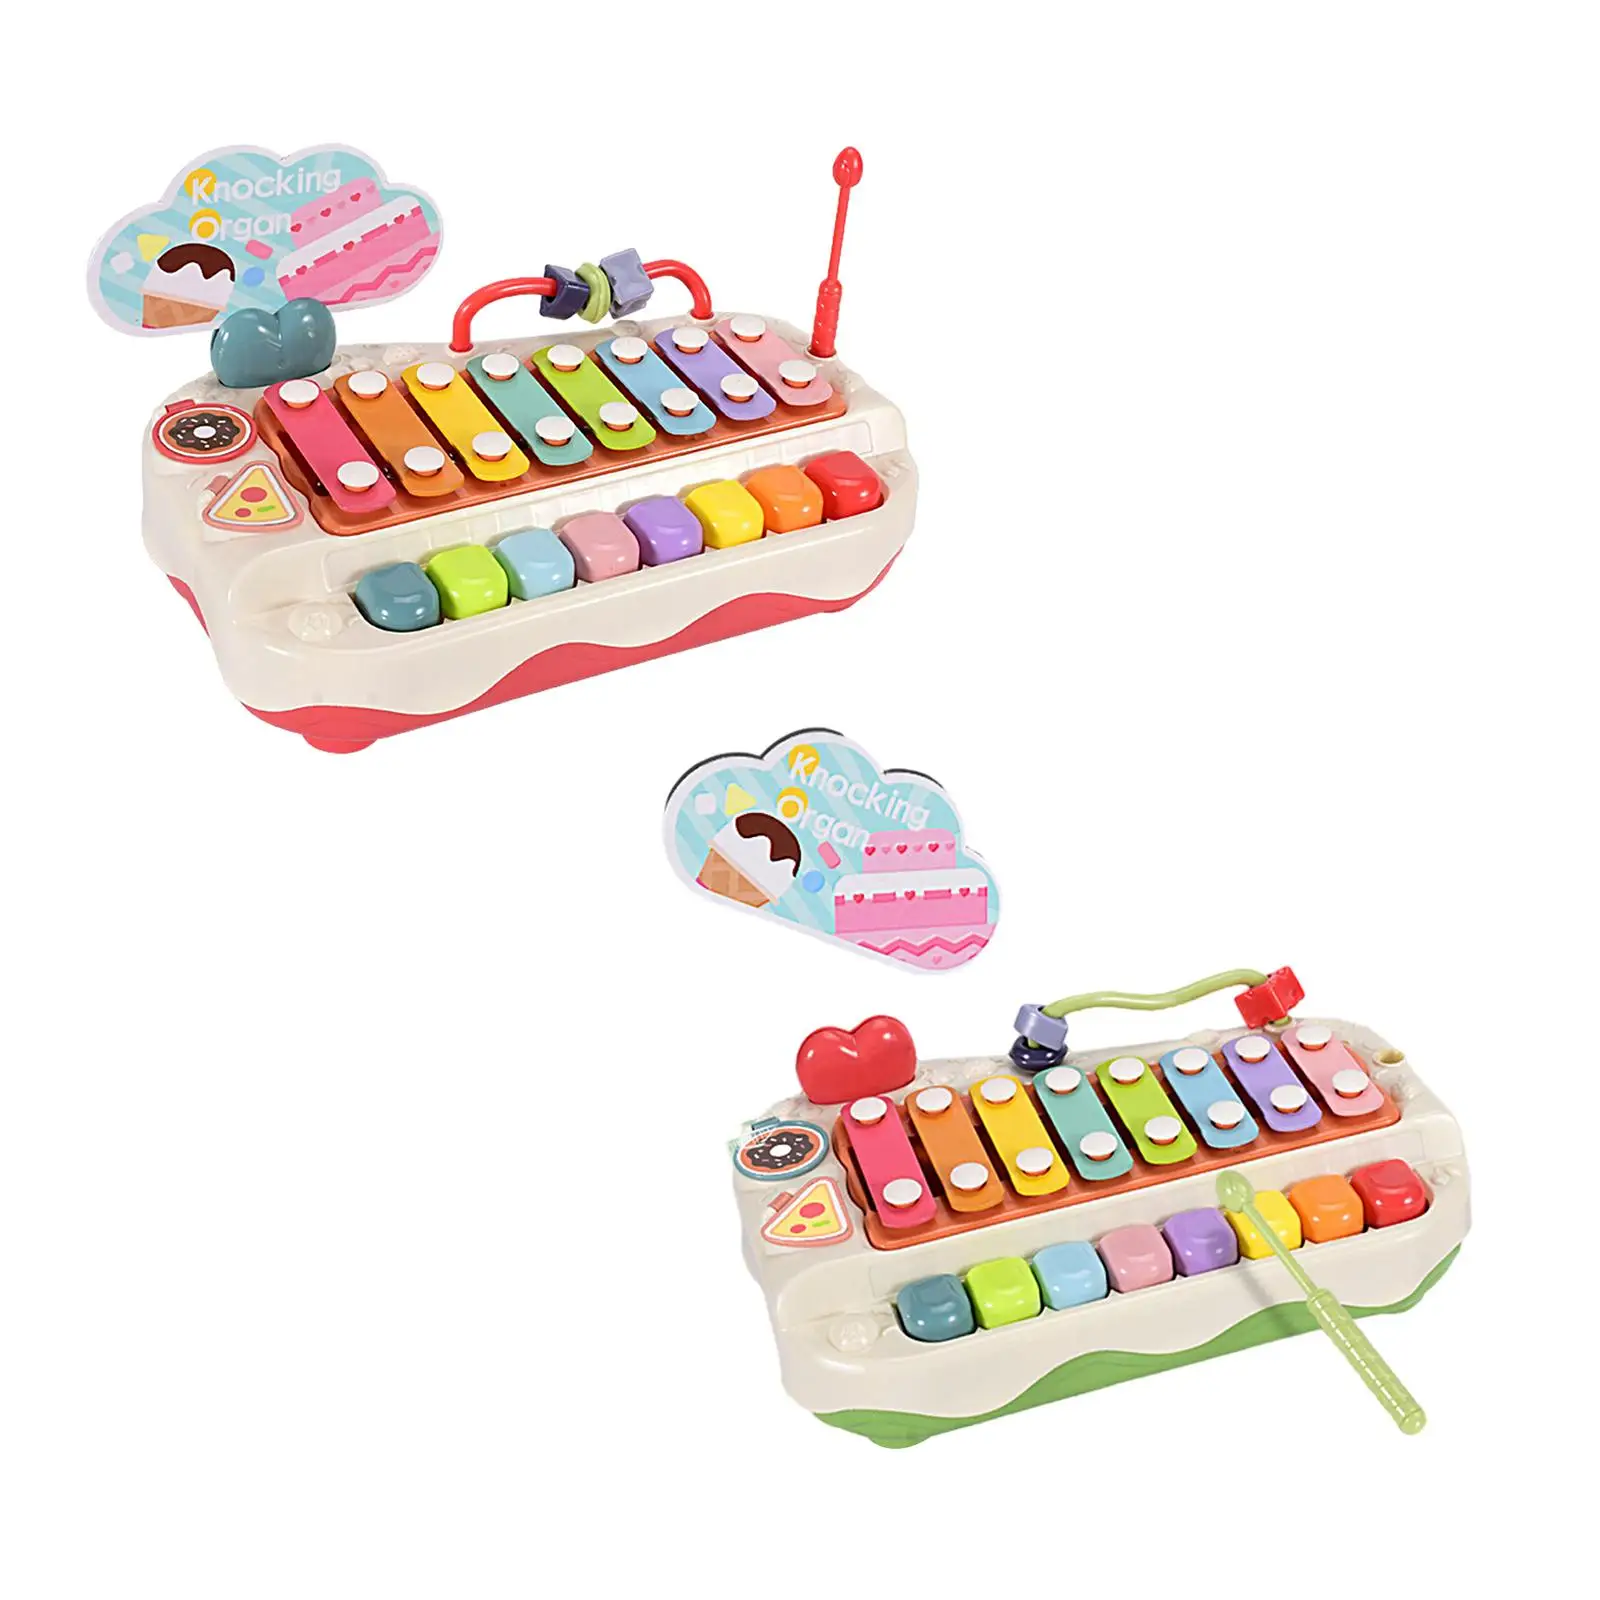 Baby Musical Toy Eight Tone Percussion Instrument Hammering Pounding Toys for Baby 1 2 3 Years Old Kids Toddler Birthday Gift